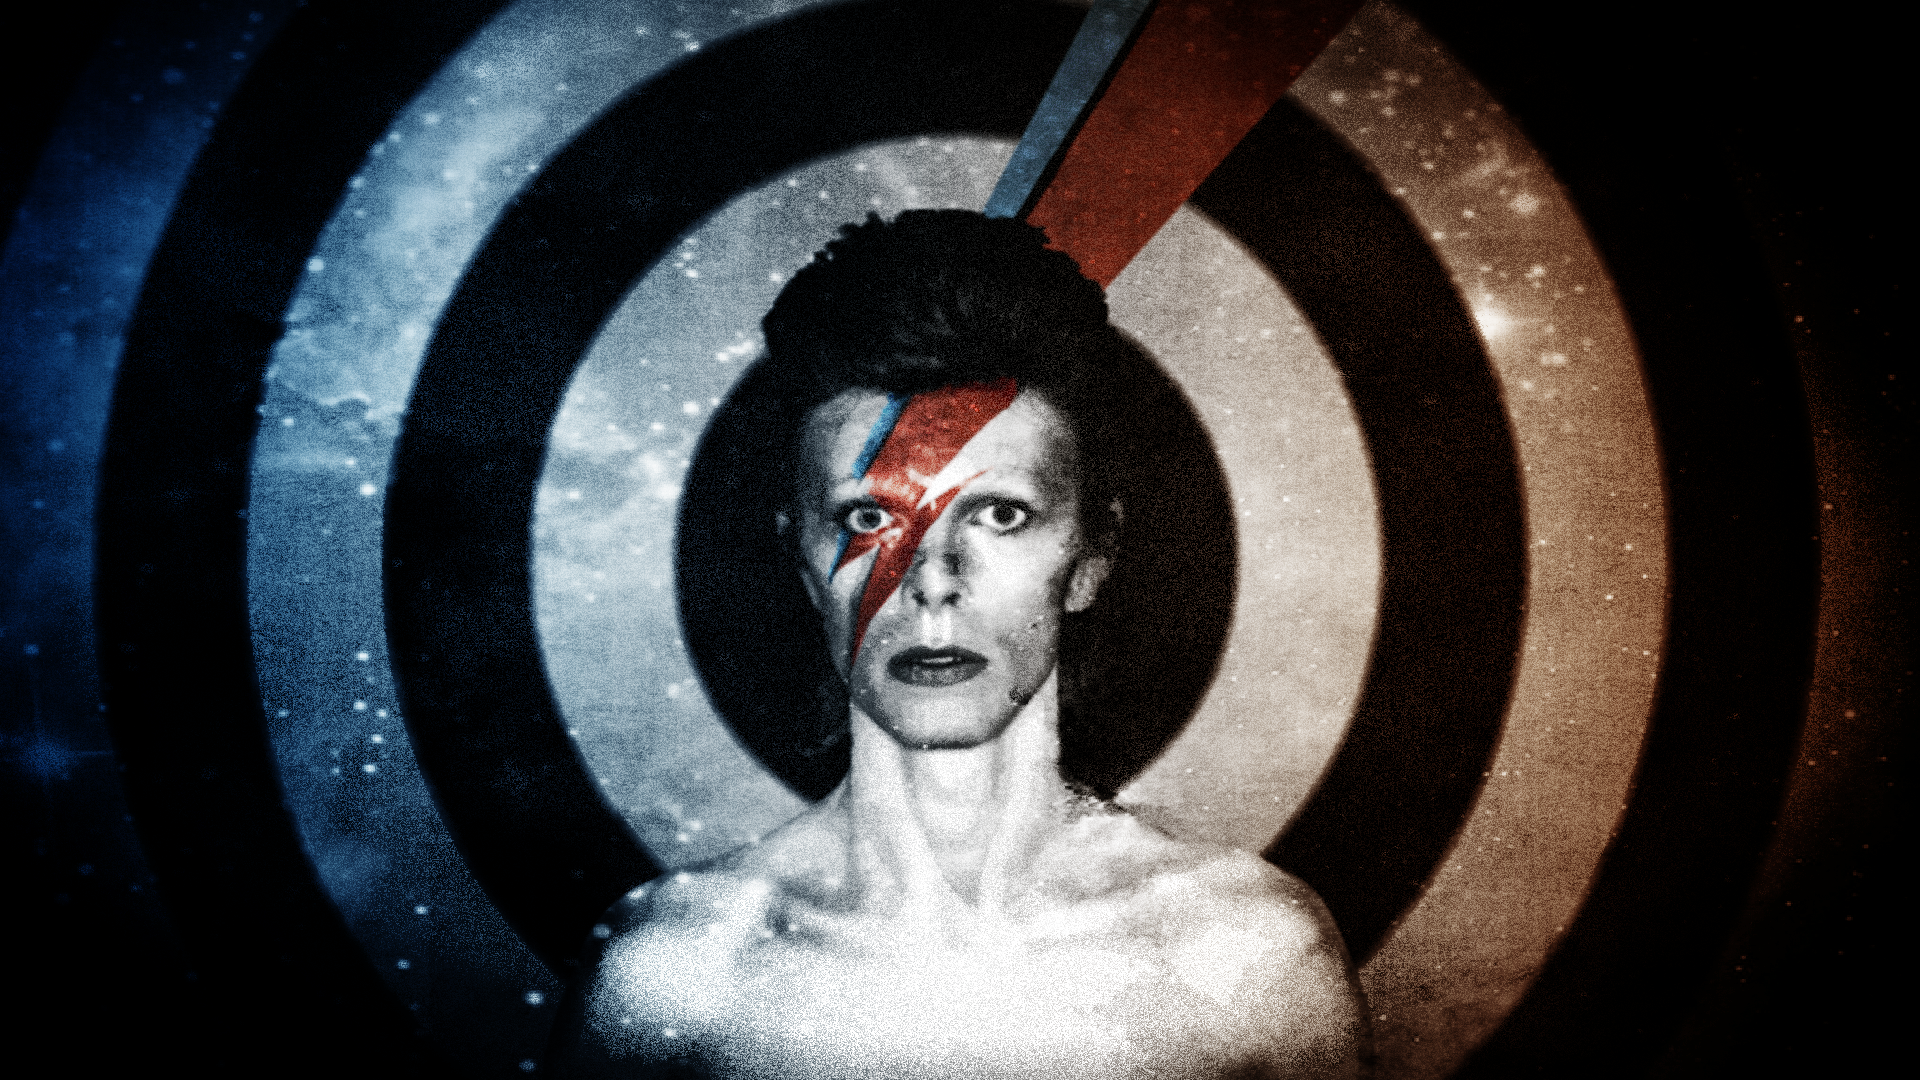 David Bowie Wallpapers, Pictures, Images